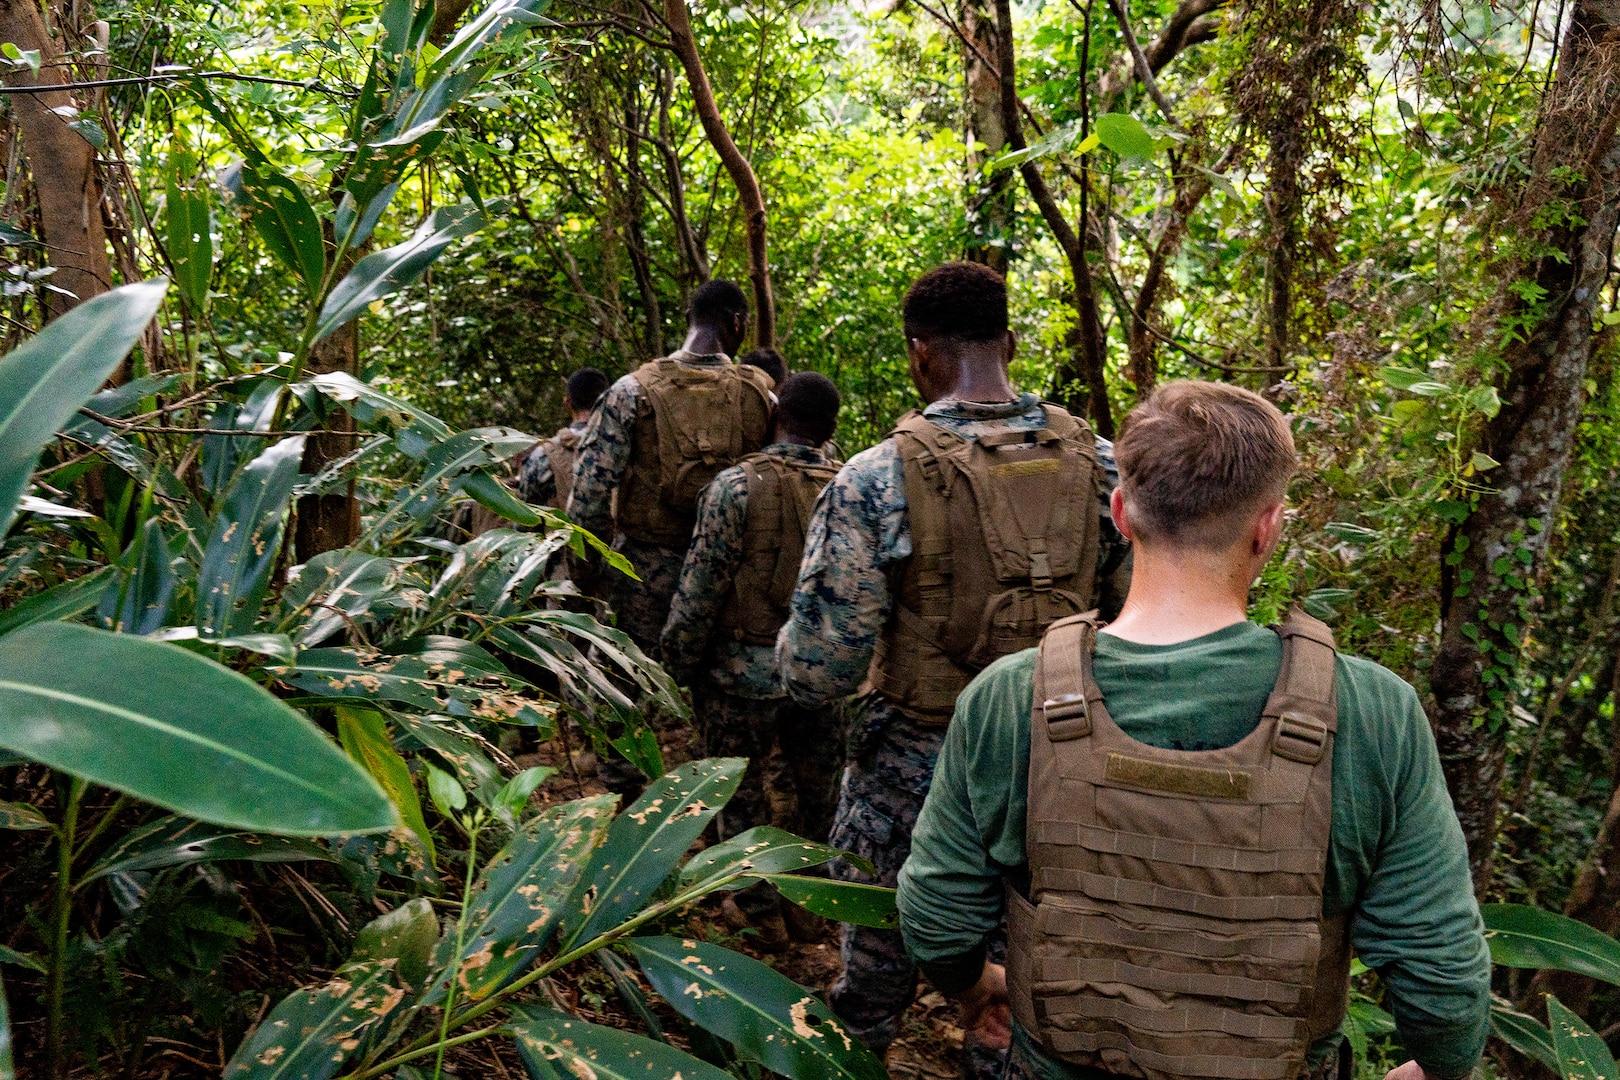 Marines with Course 205-19 Endure and Complete the Grueling 3-week MAI Course